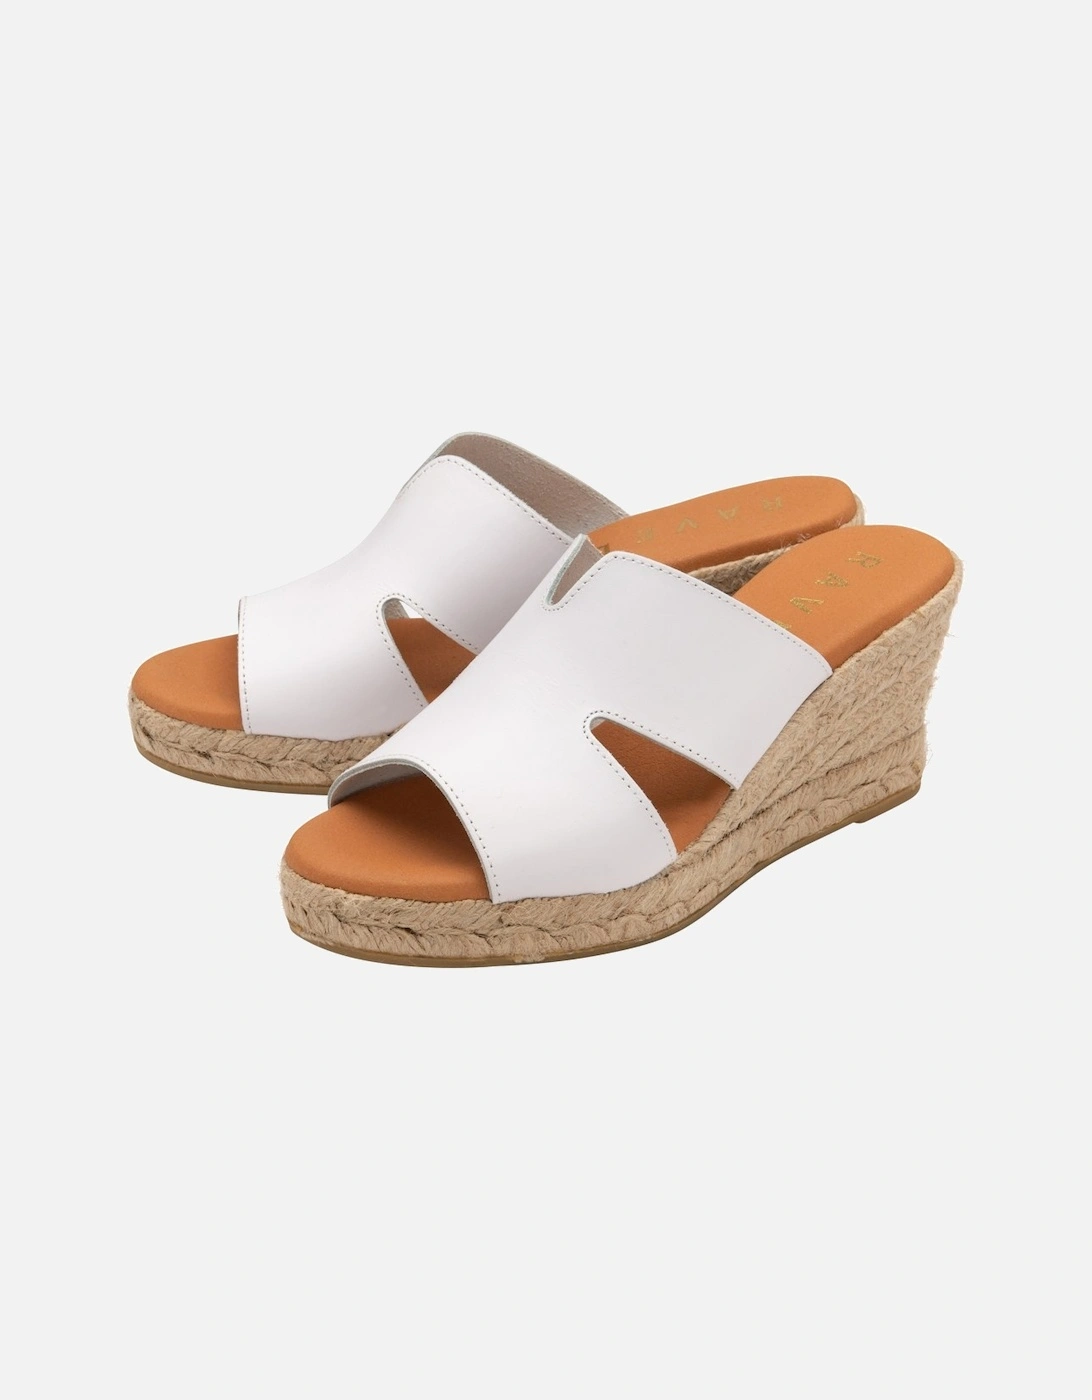 Arby Womens Wedge Sandals